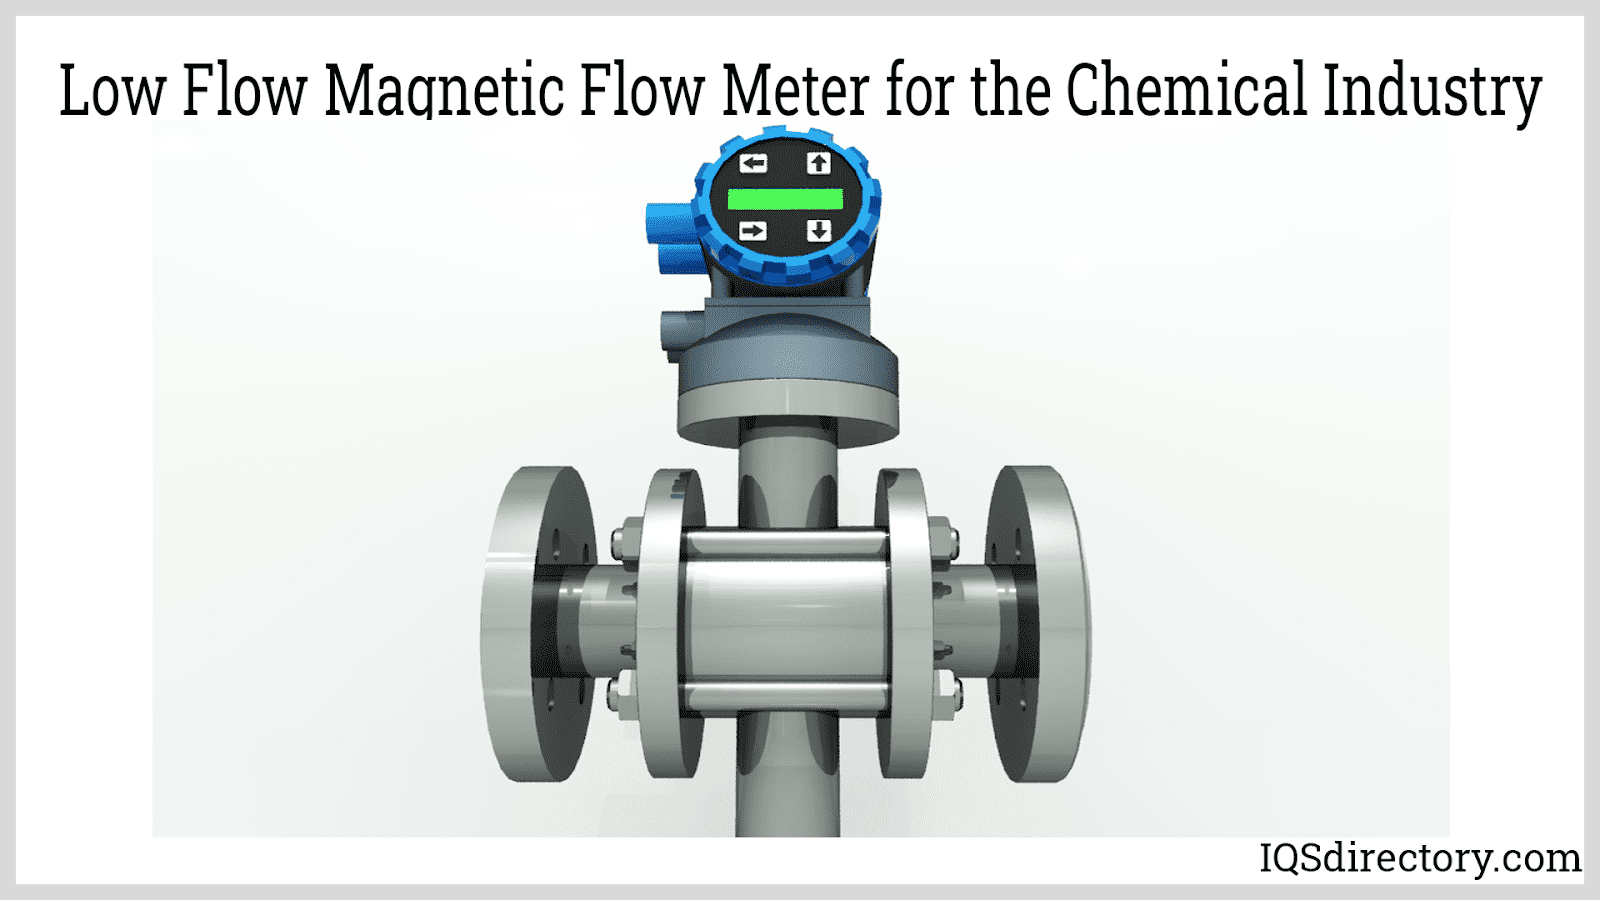 Low Flow Magnetic Flow Meter for the Chemical Industry